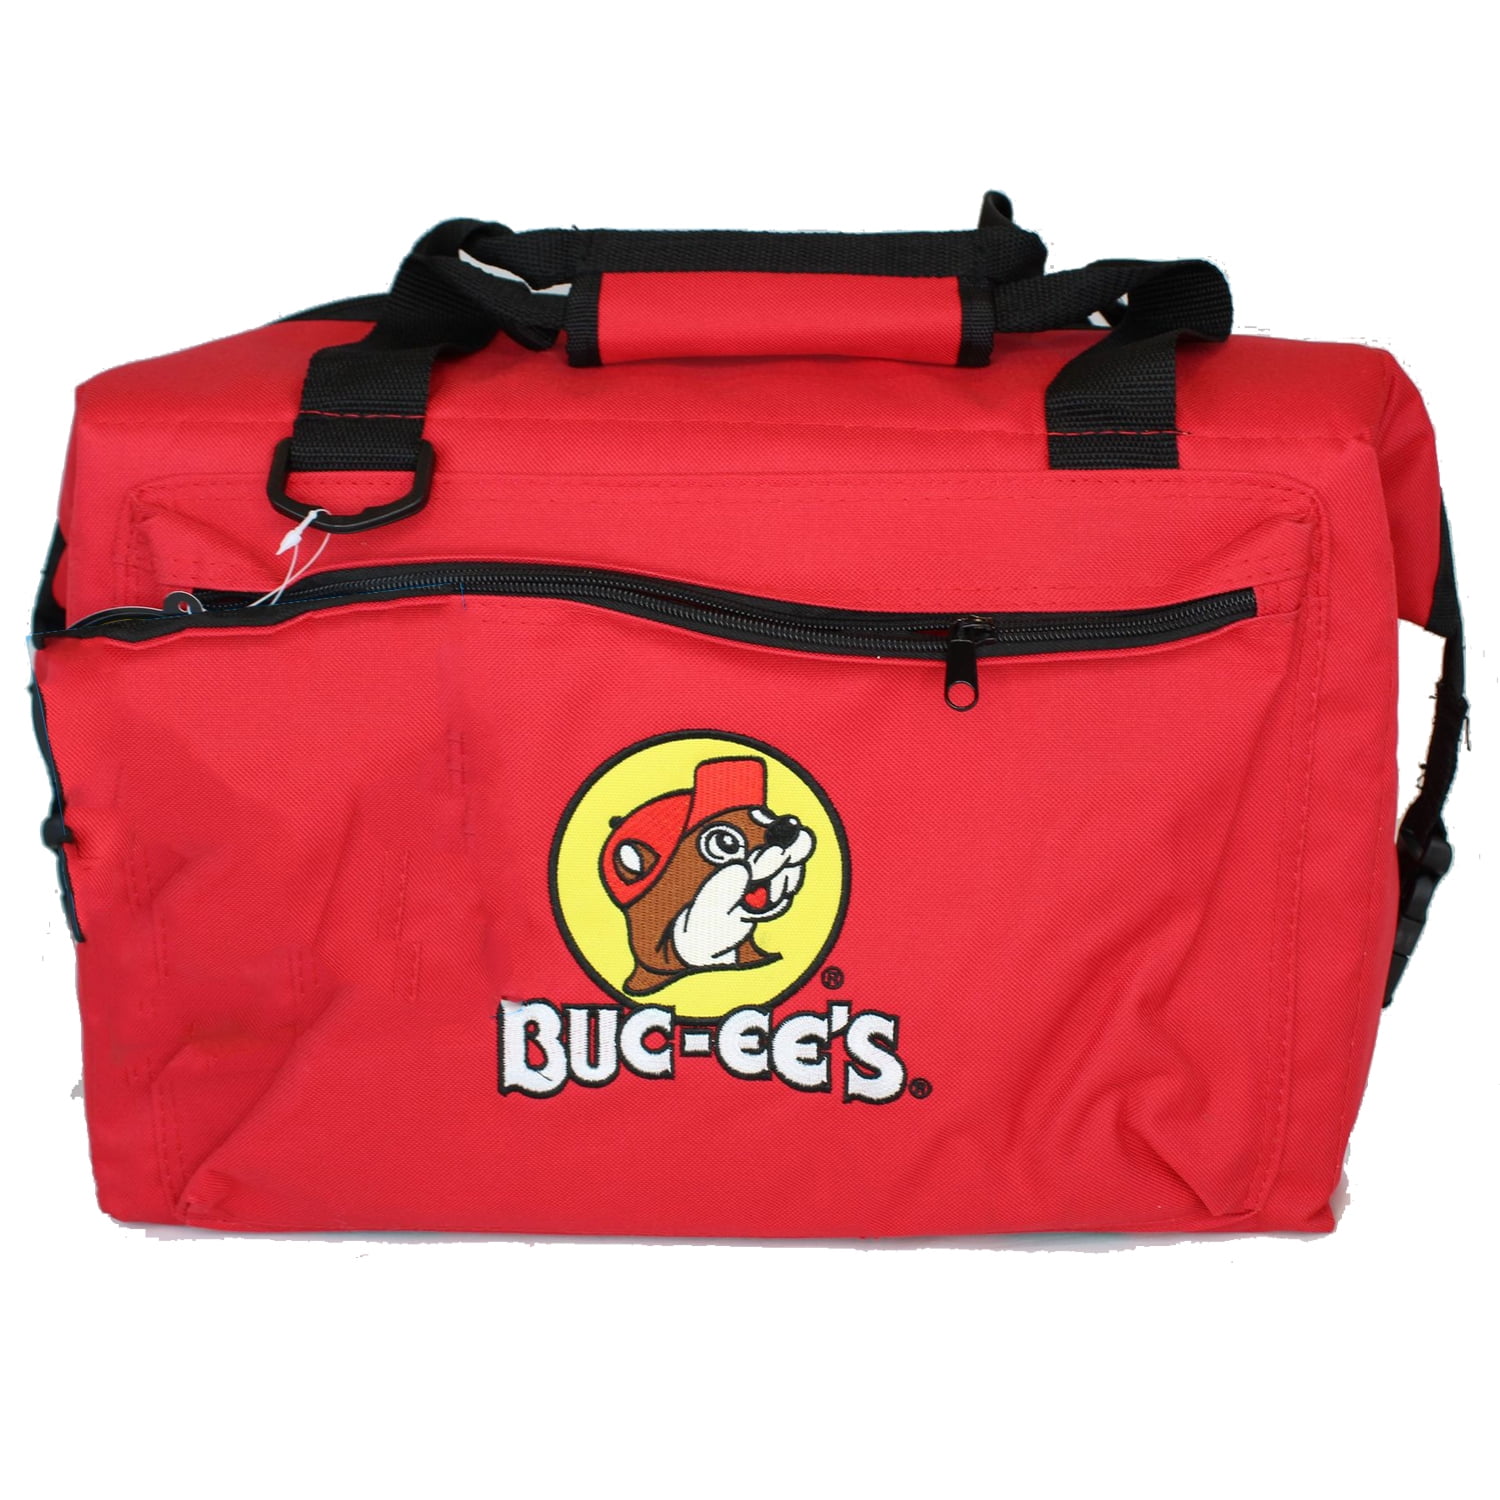 Cooler Bag Ice Pack - China Lunch Bag and Cooler Bag price